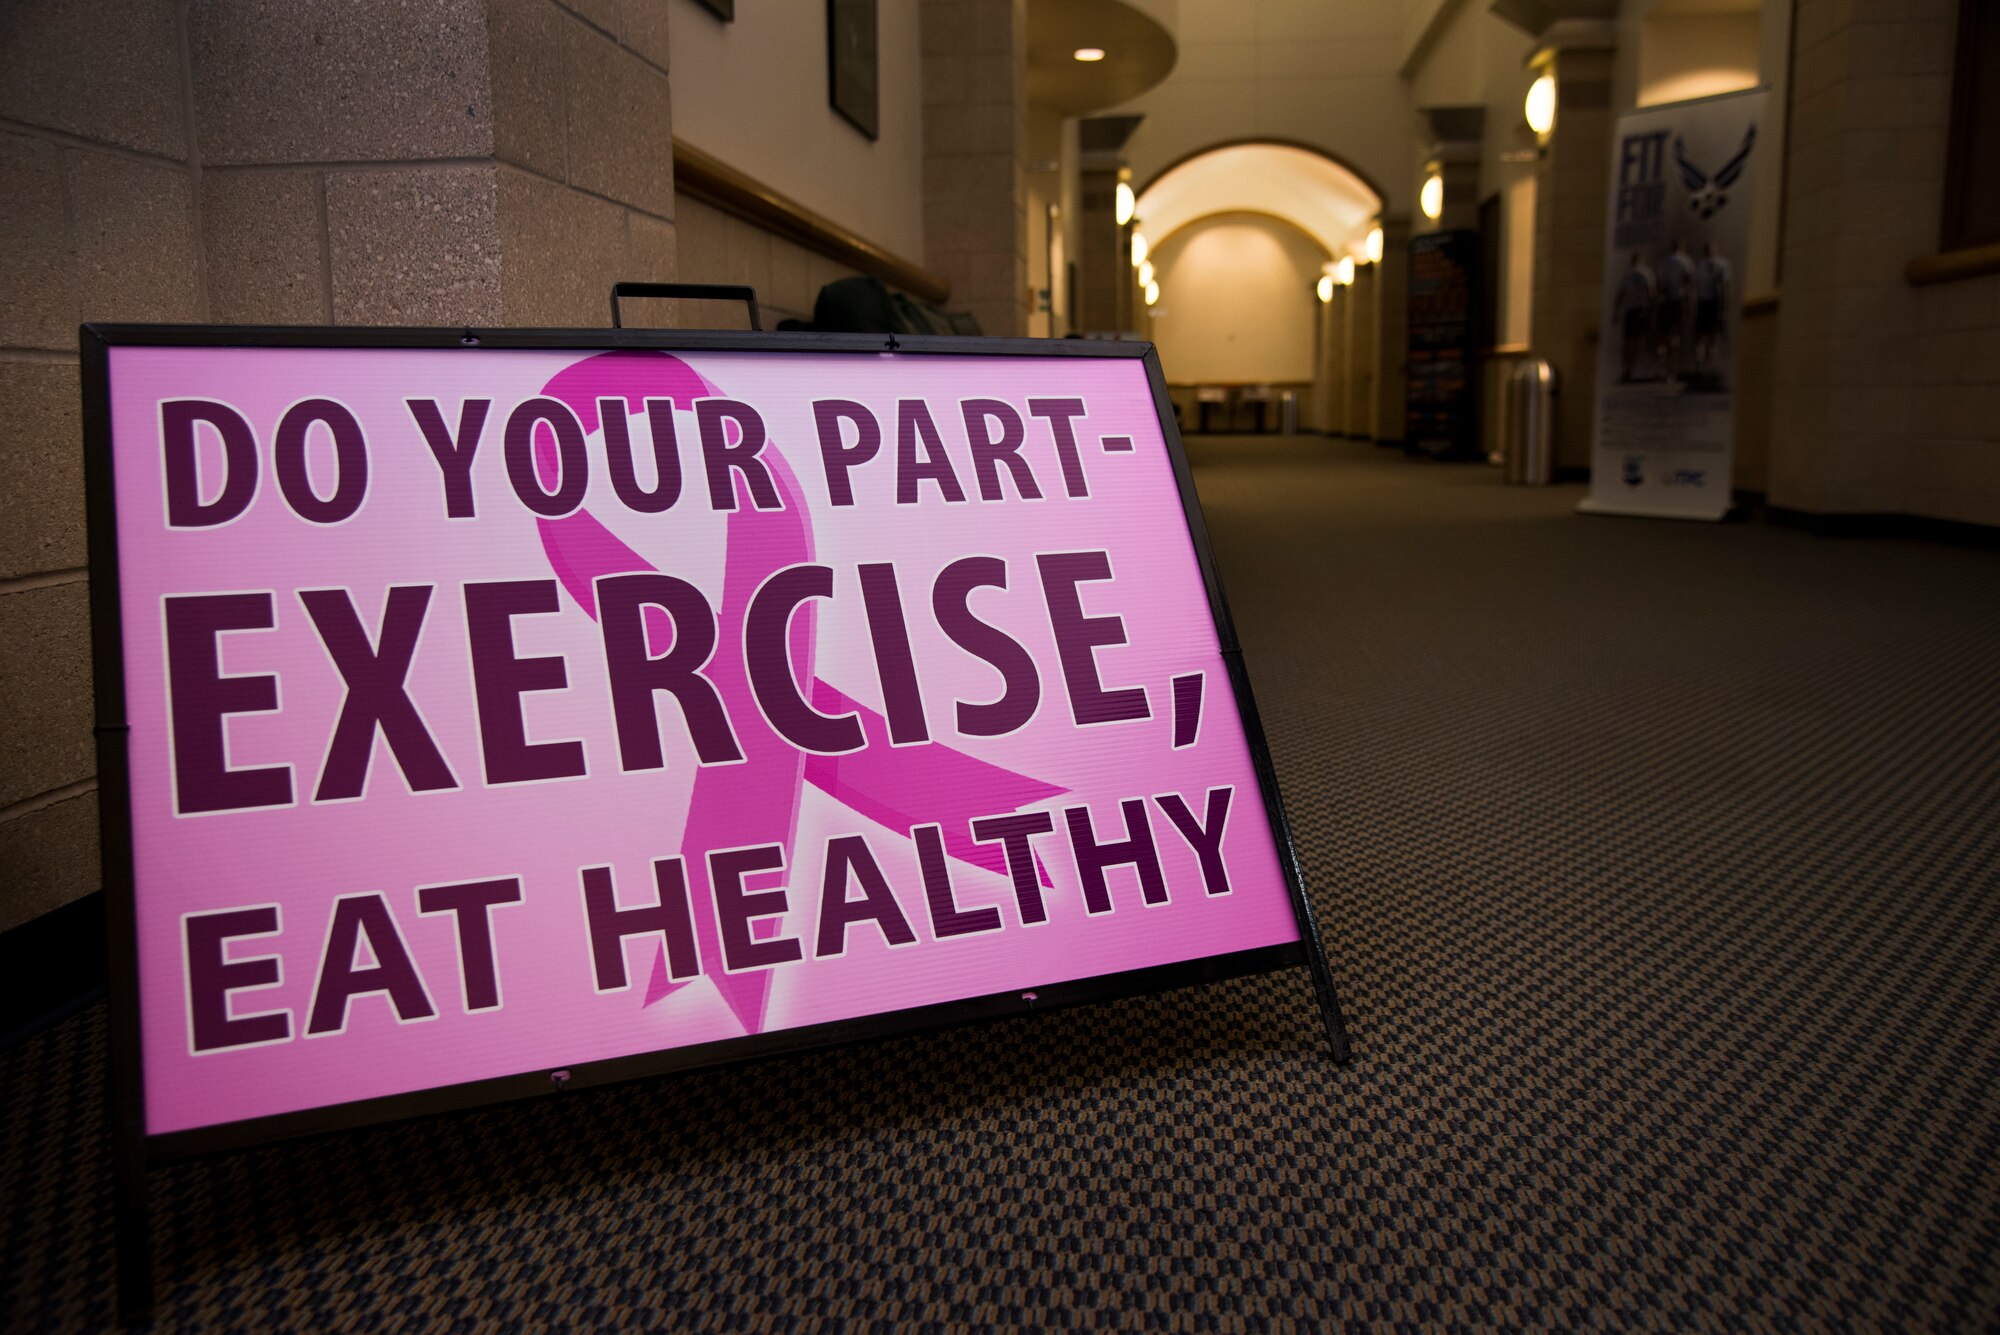 A sign promotes breast cancer awareness at the Losano Fitness Center on Laughlin Air Force Base, Texas, Oct. 5, 2018. About one in eight women in the U.S. will develop invasive breast cancer over the course of her lifetime, according to the National Breast Cancer Foundation. Although breast cancer is more commonly found in women, less than one percent of breast cancer cases develop in men. (U.S. Air Force photo by Airman 1st Class Marco A. Gomez)